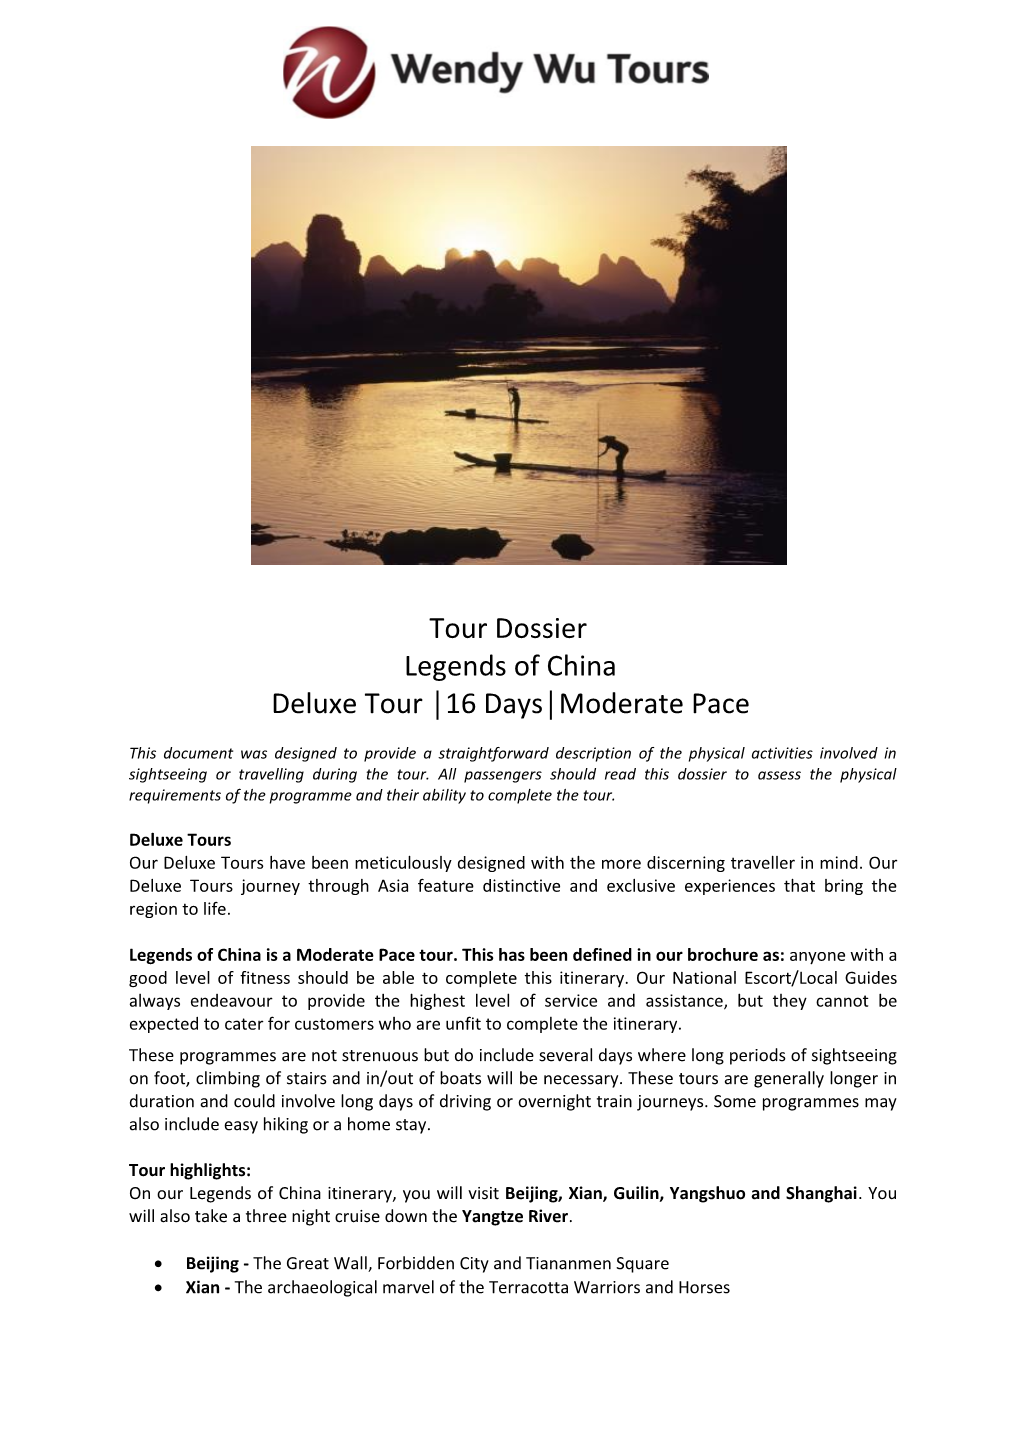 Tour Dossier Legends of China Deluxe Tour 16